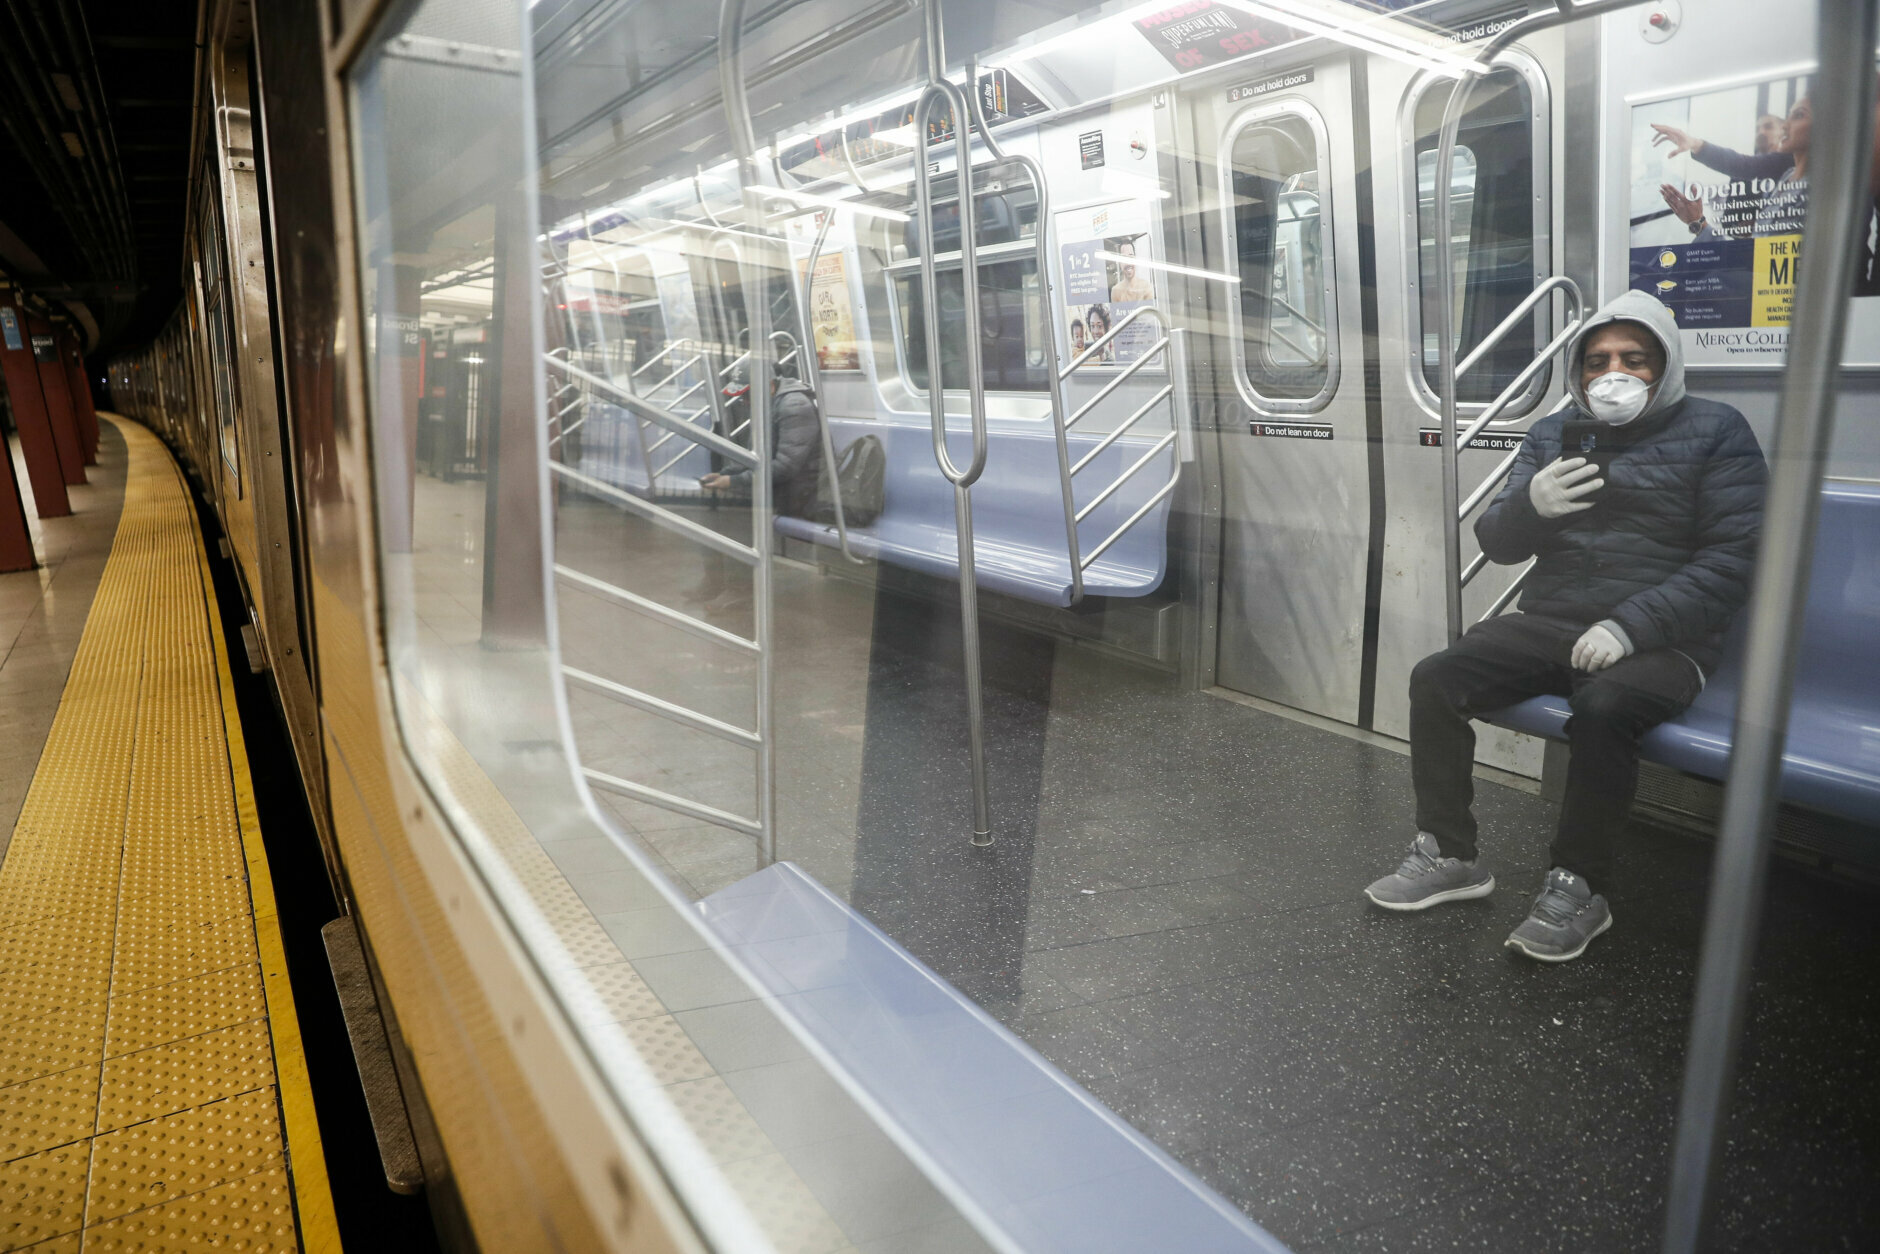 Subway riders wear protective masks and gloves on a sparsely populated car during morning hours due to COVID-19 concerns that are driving down ridership, Thursday, March 19, 2020, in New York. New York Gov. Andrew Cuomo tightened work-from-home rules Thursday as confirmed cases continued to climb in New York, an expected jump as testing becomes more widespread. But he stressed that roadblocks and martial law for New York City were merely rumors. 